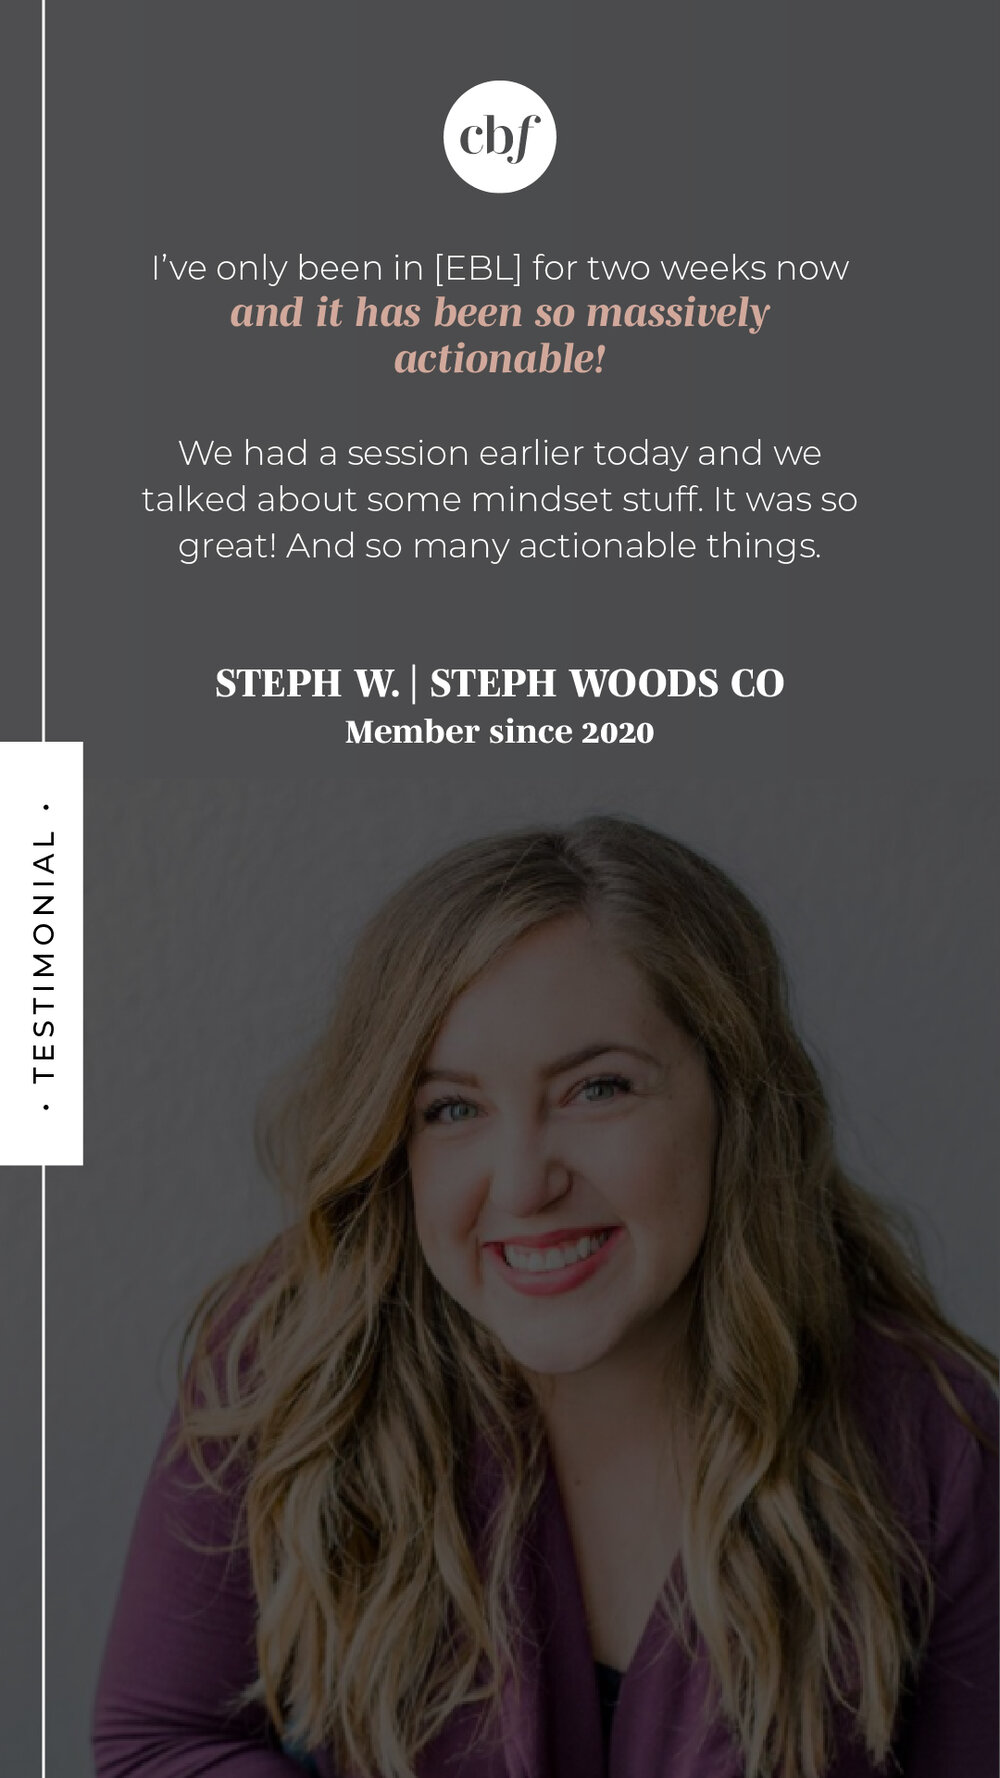 The Empowered Boss Lab by Chelsea B Foster | Testimonial from Steph W. of Steph Woods Co, member since 2020